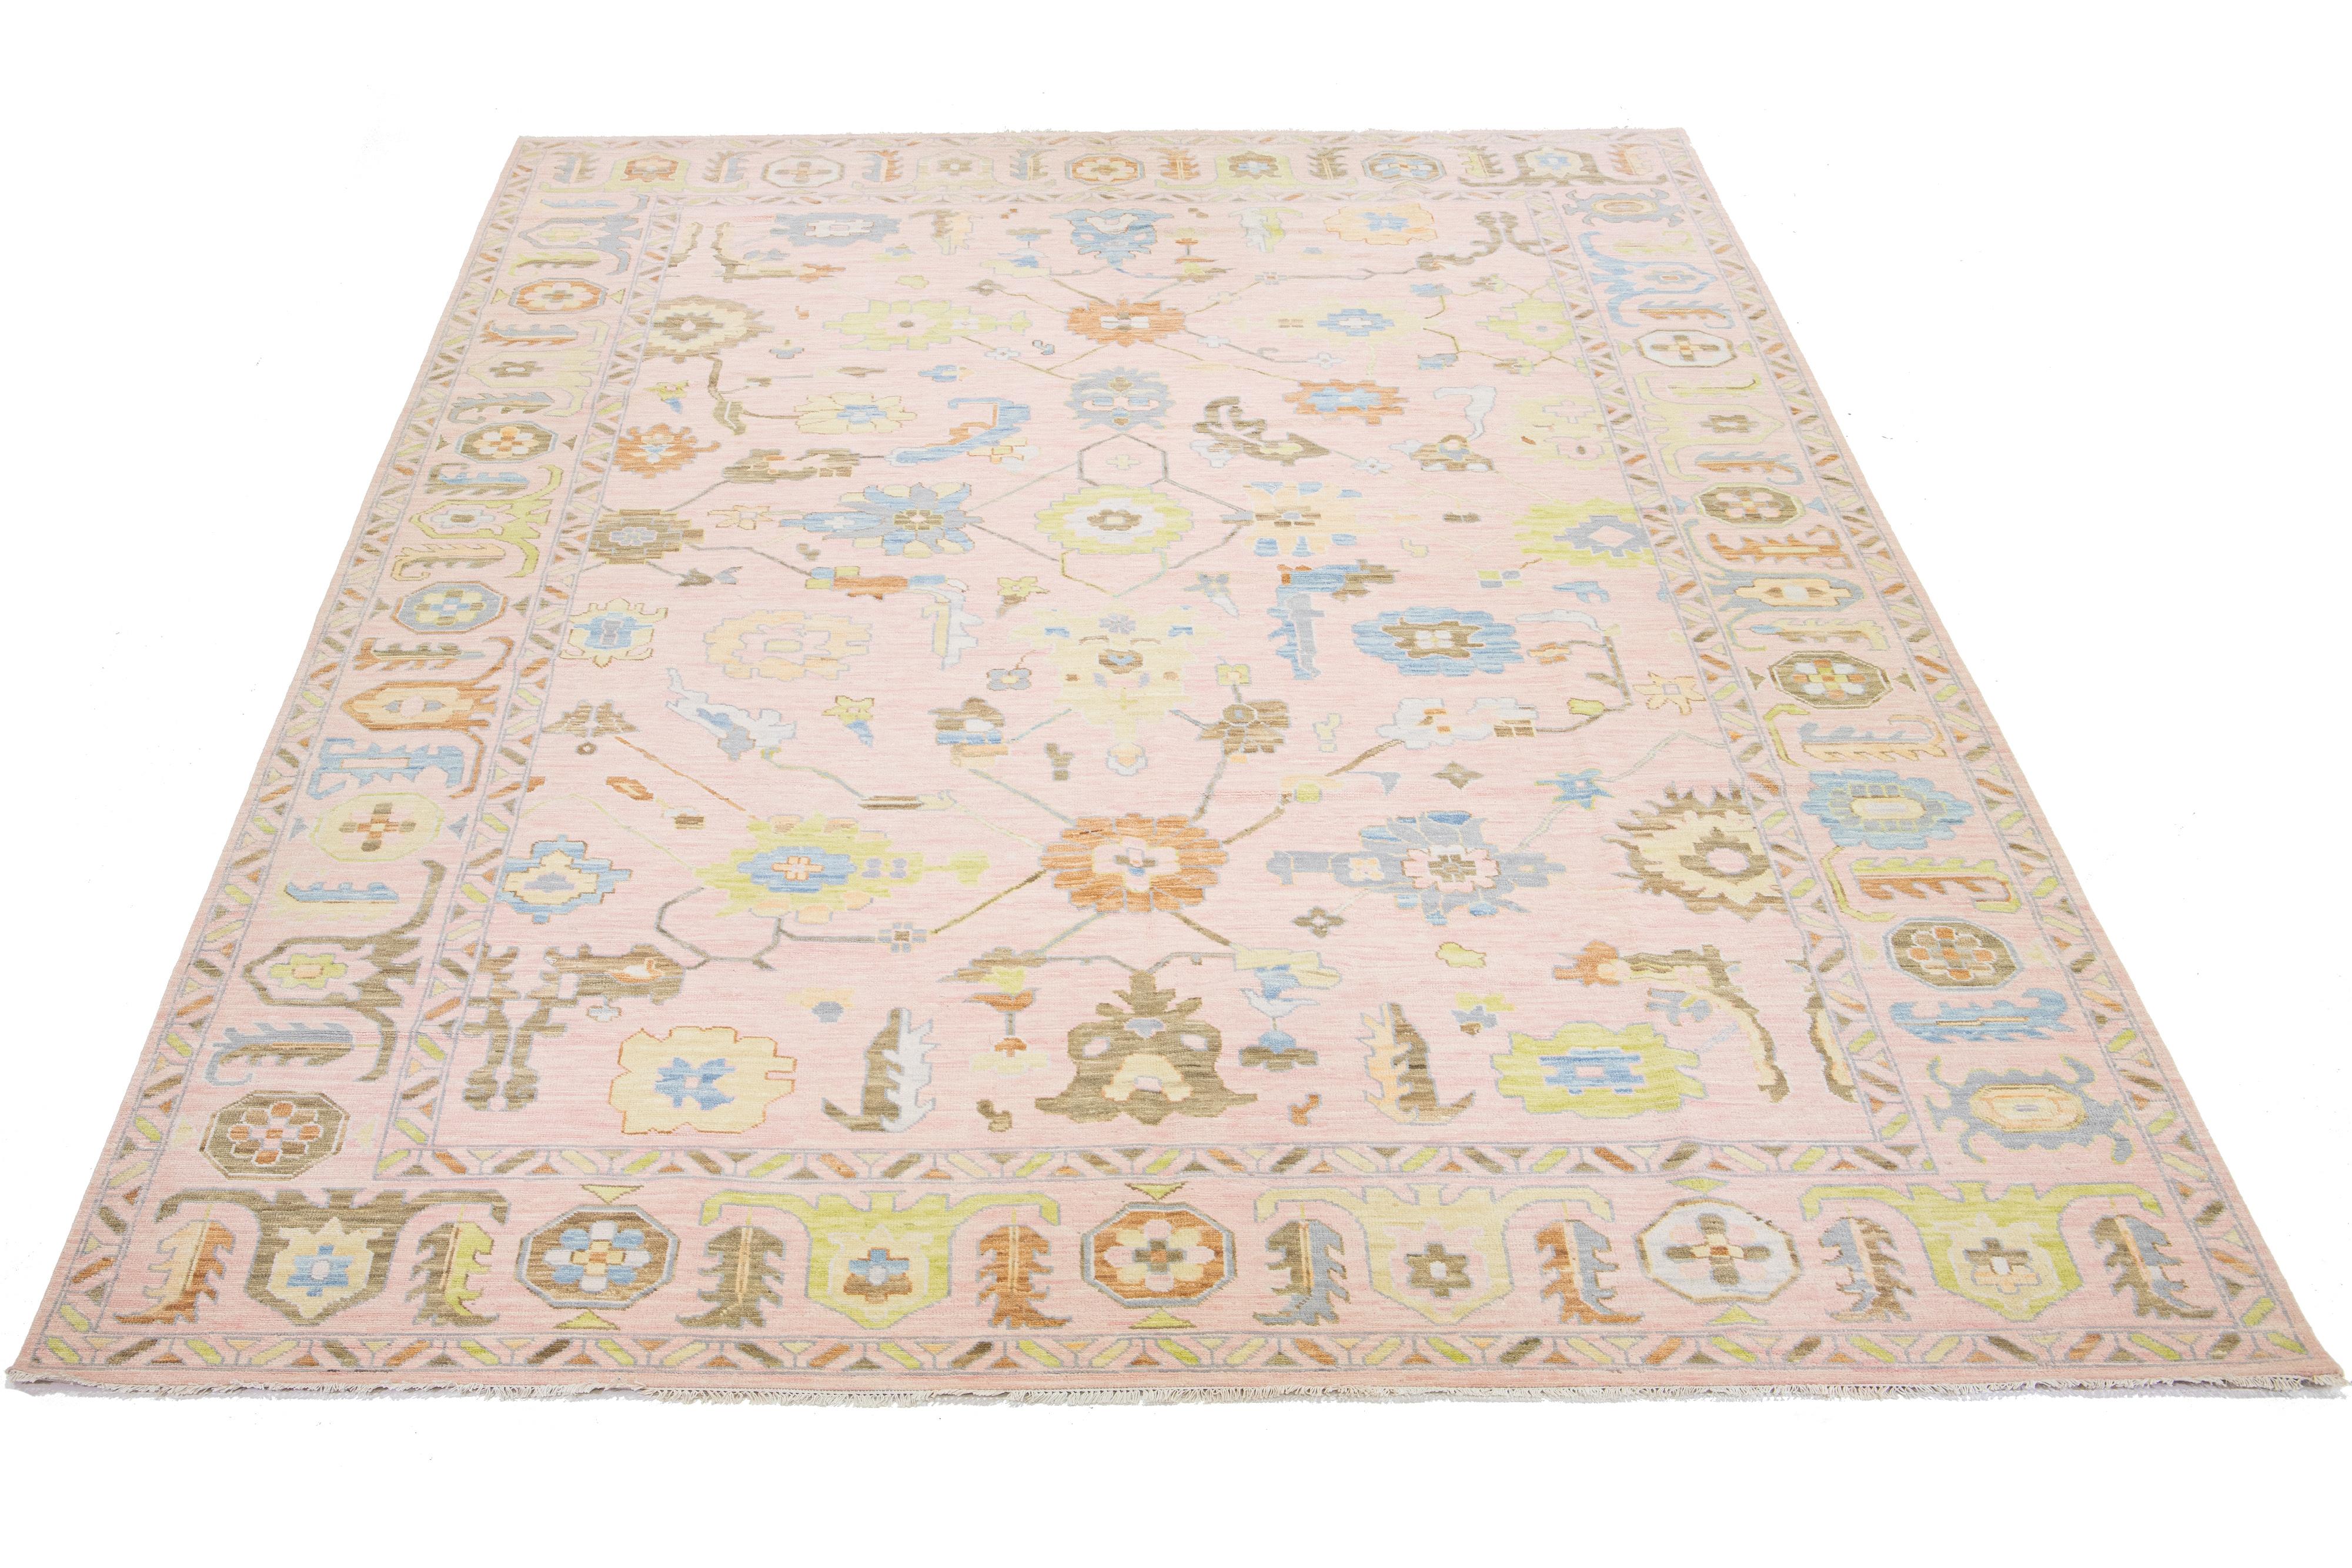 This Oushak-style rug features a hand-knotted pink field. It embodies a mid-century modern style with an all-over multicolored floral design.

This rug measures 12'2